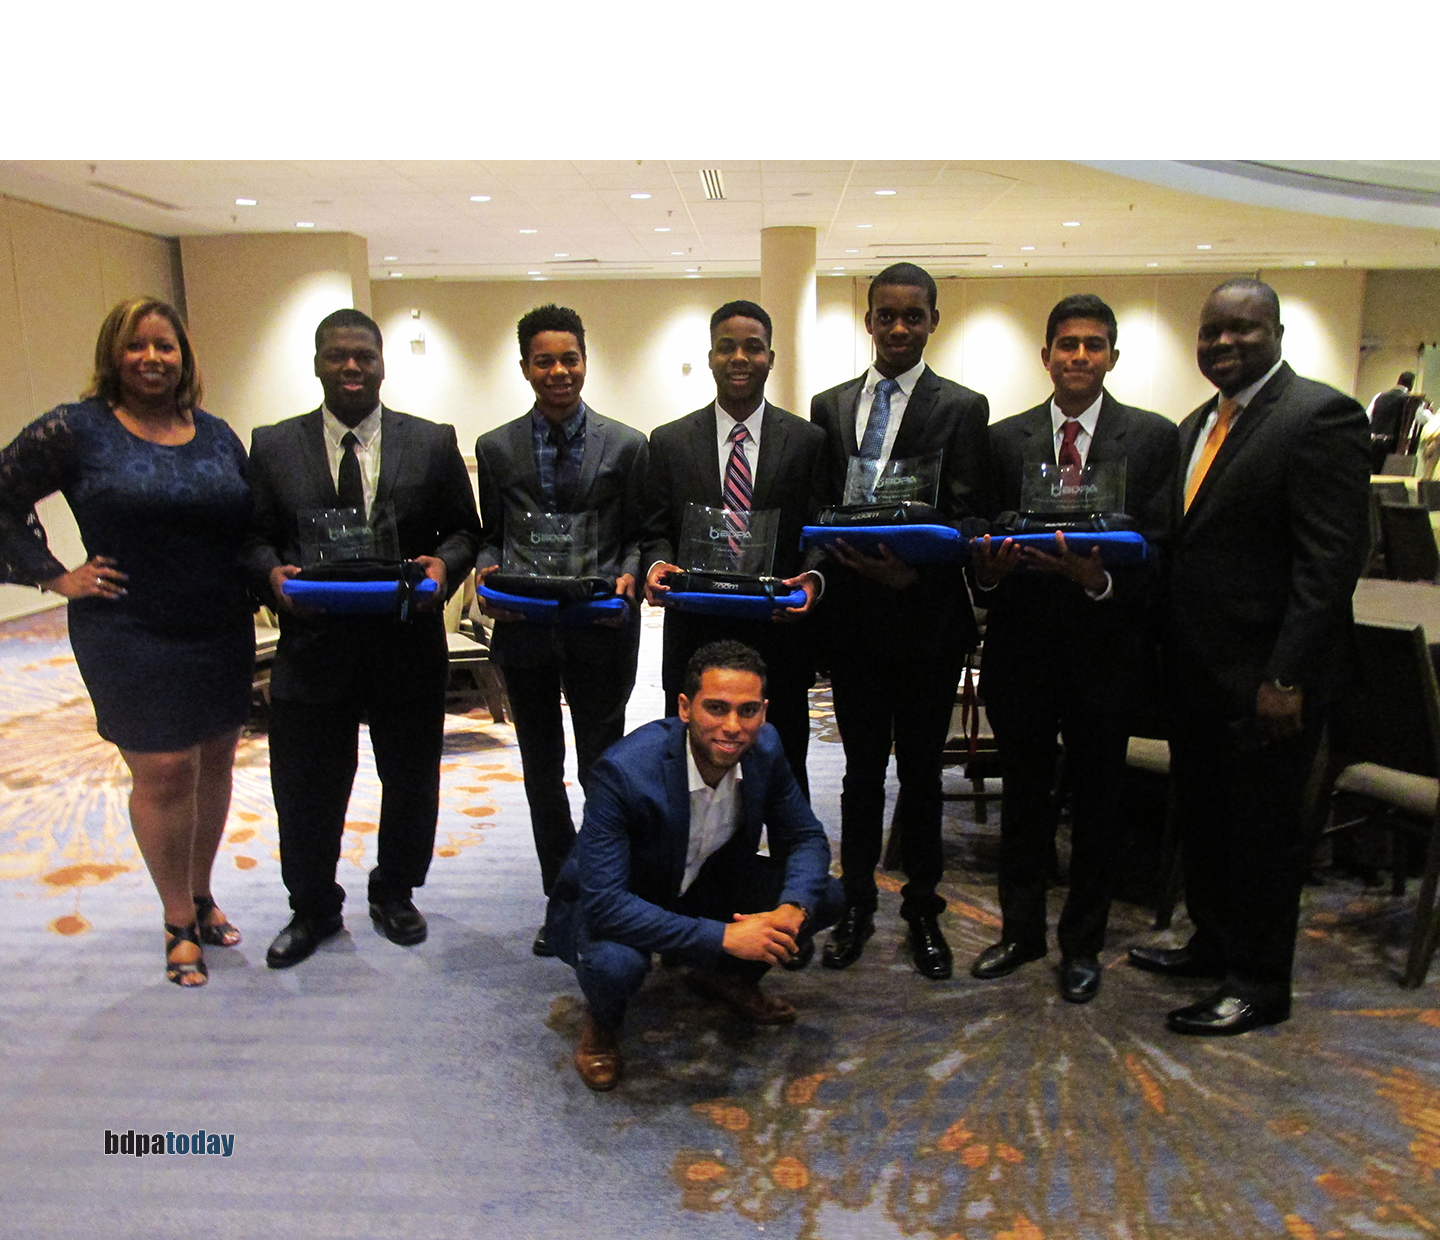 Atlanta Team Retains National High School Computer Competition Title